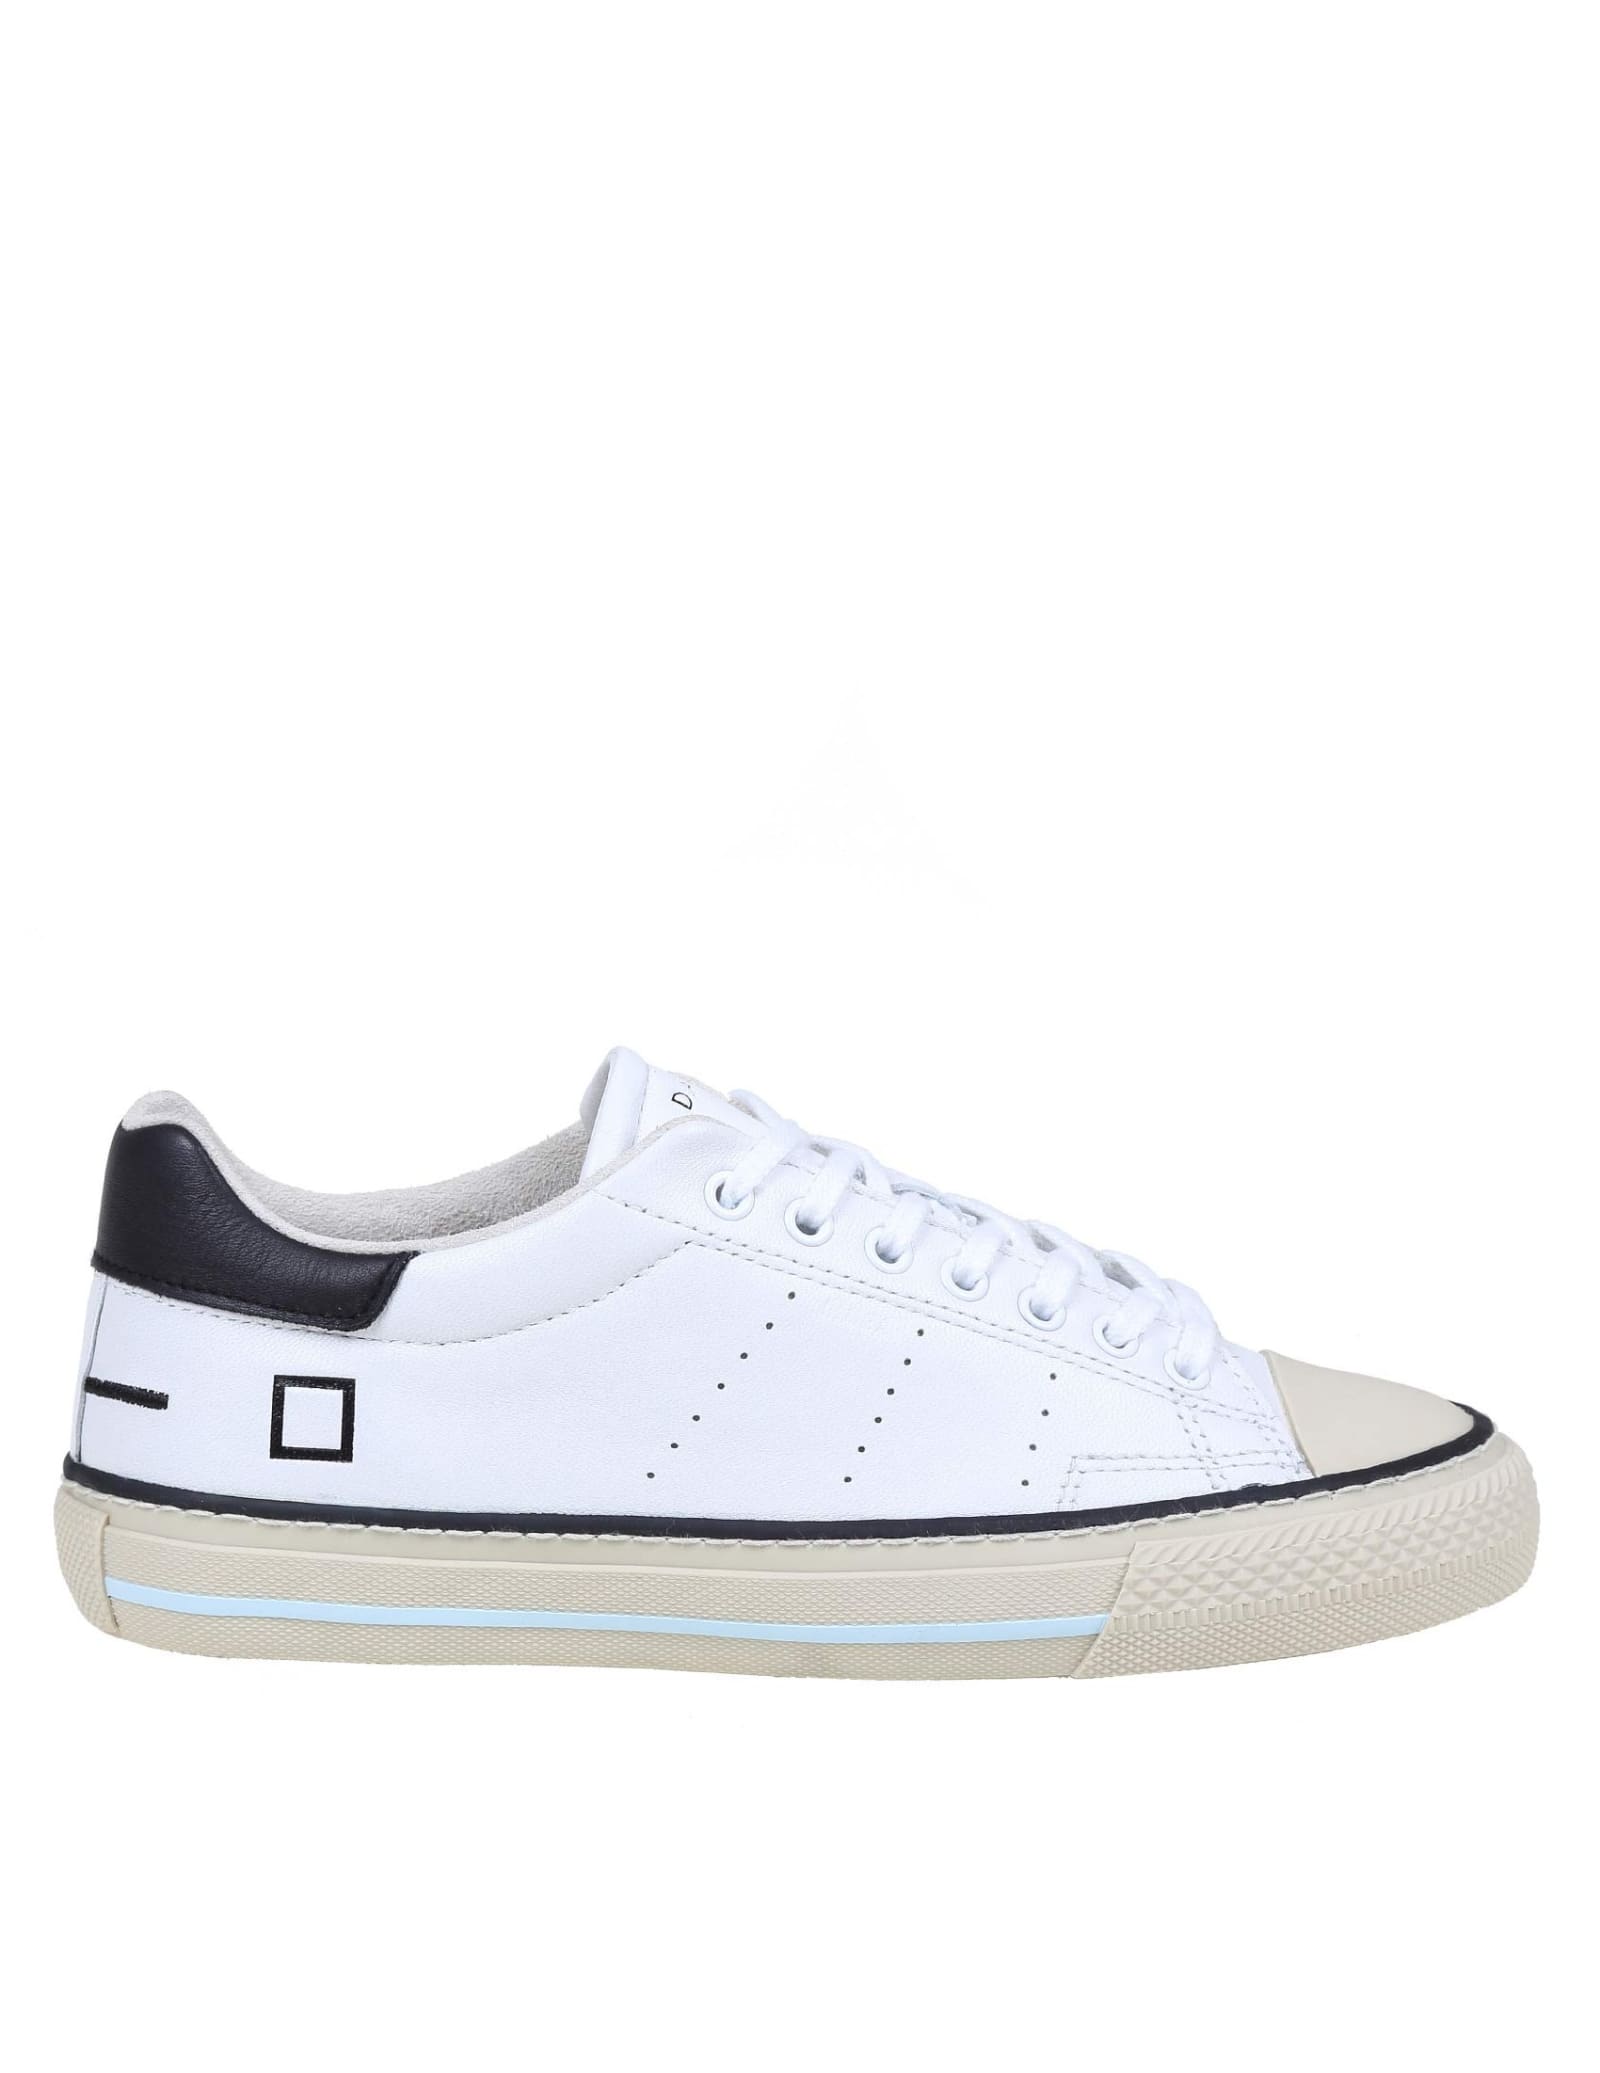 D.A.T.E. Pope Sneakers Color White And Black